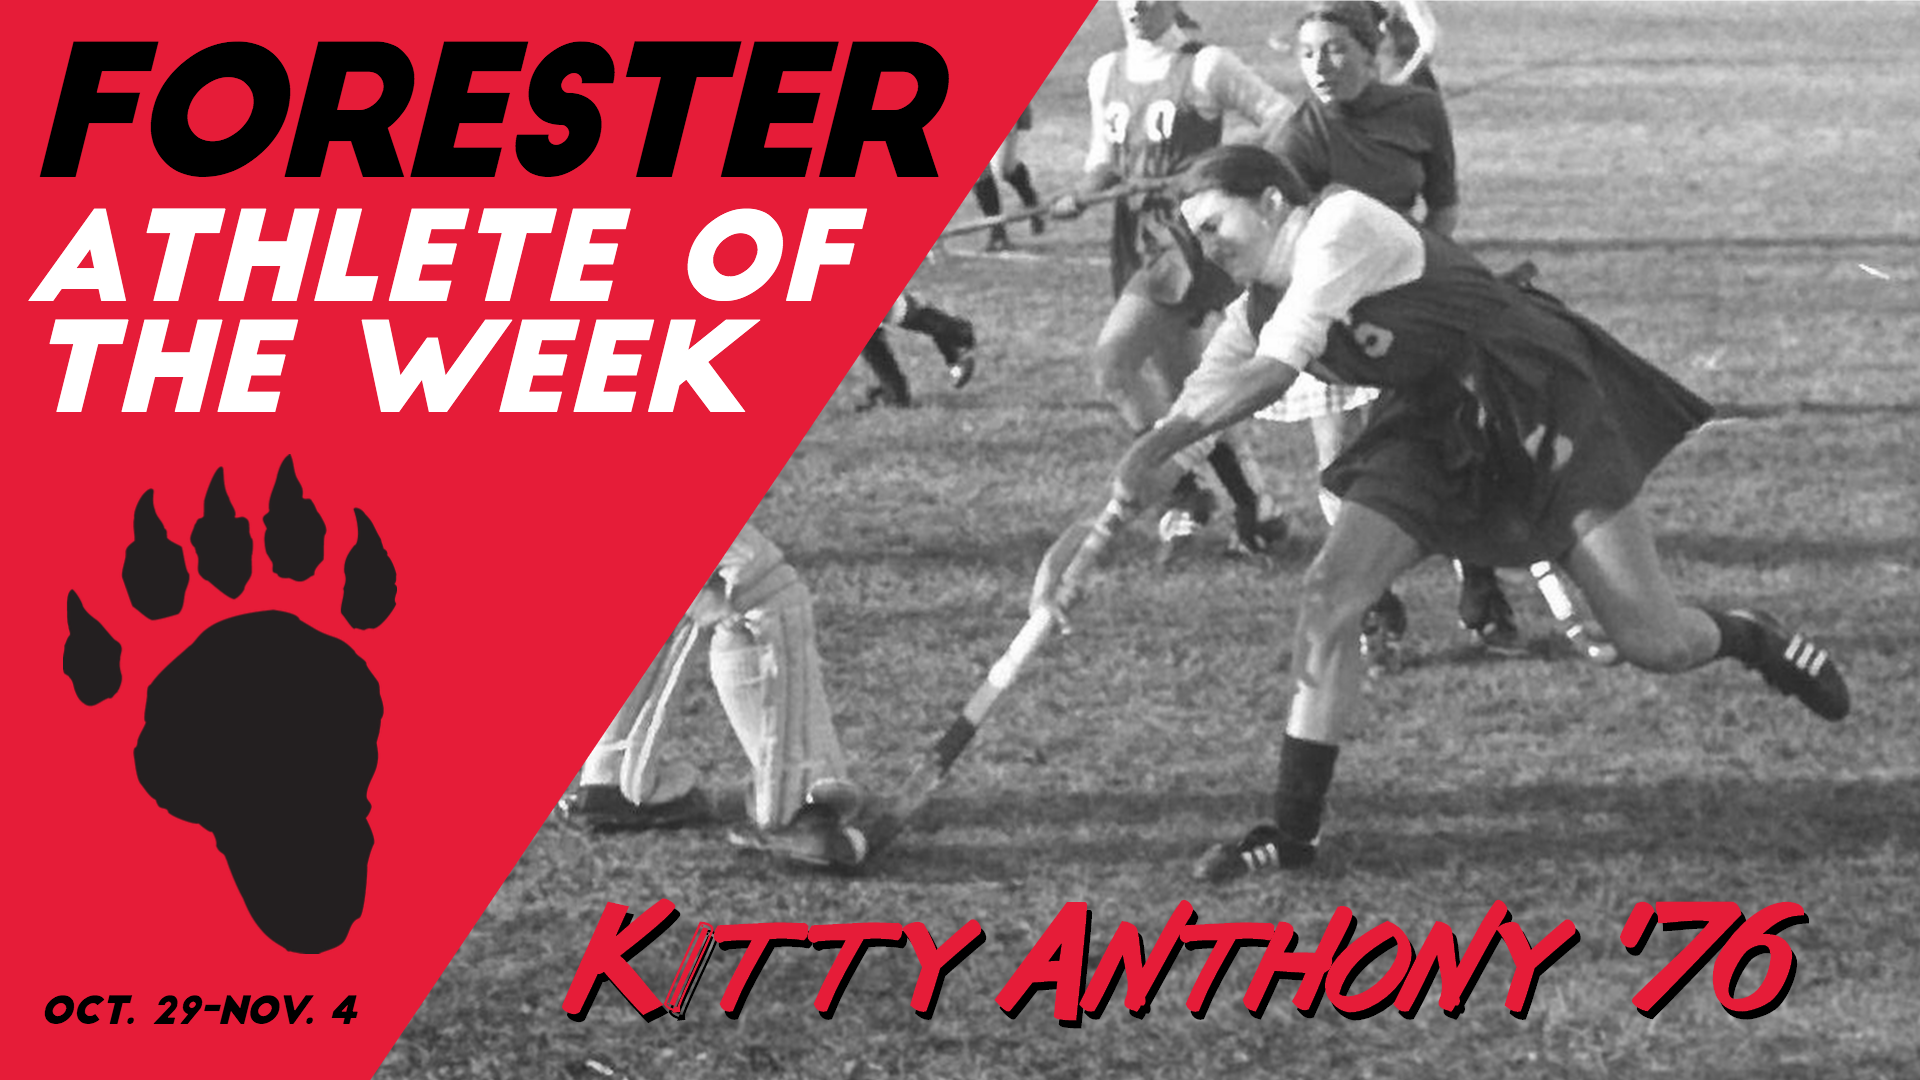 Field Hockey Player Kitty Anthony '76 Named Forester Athlete of the Week